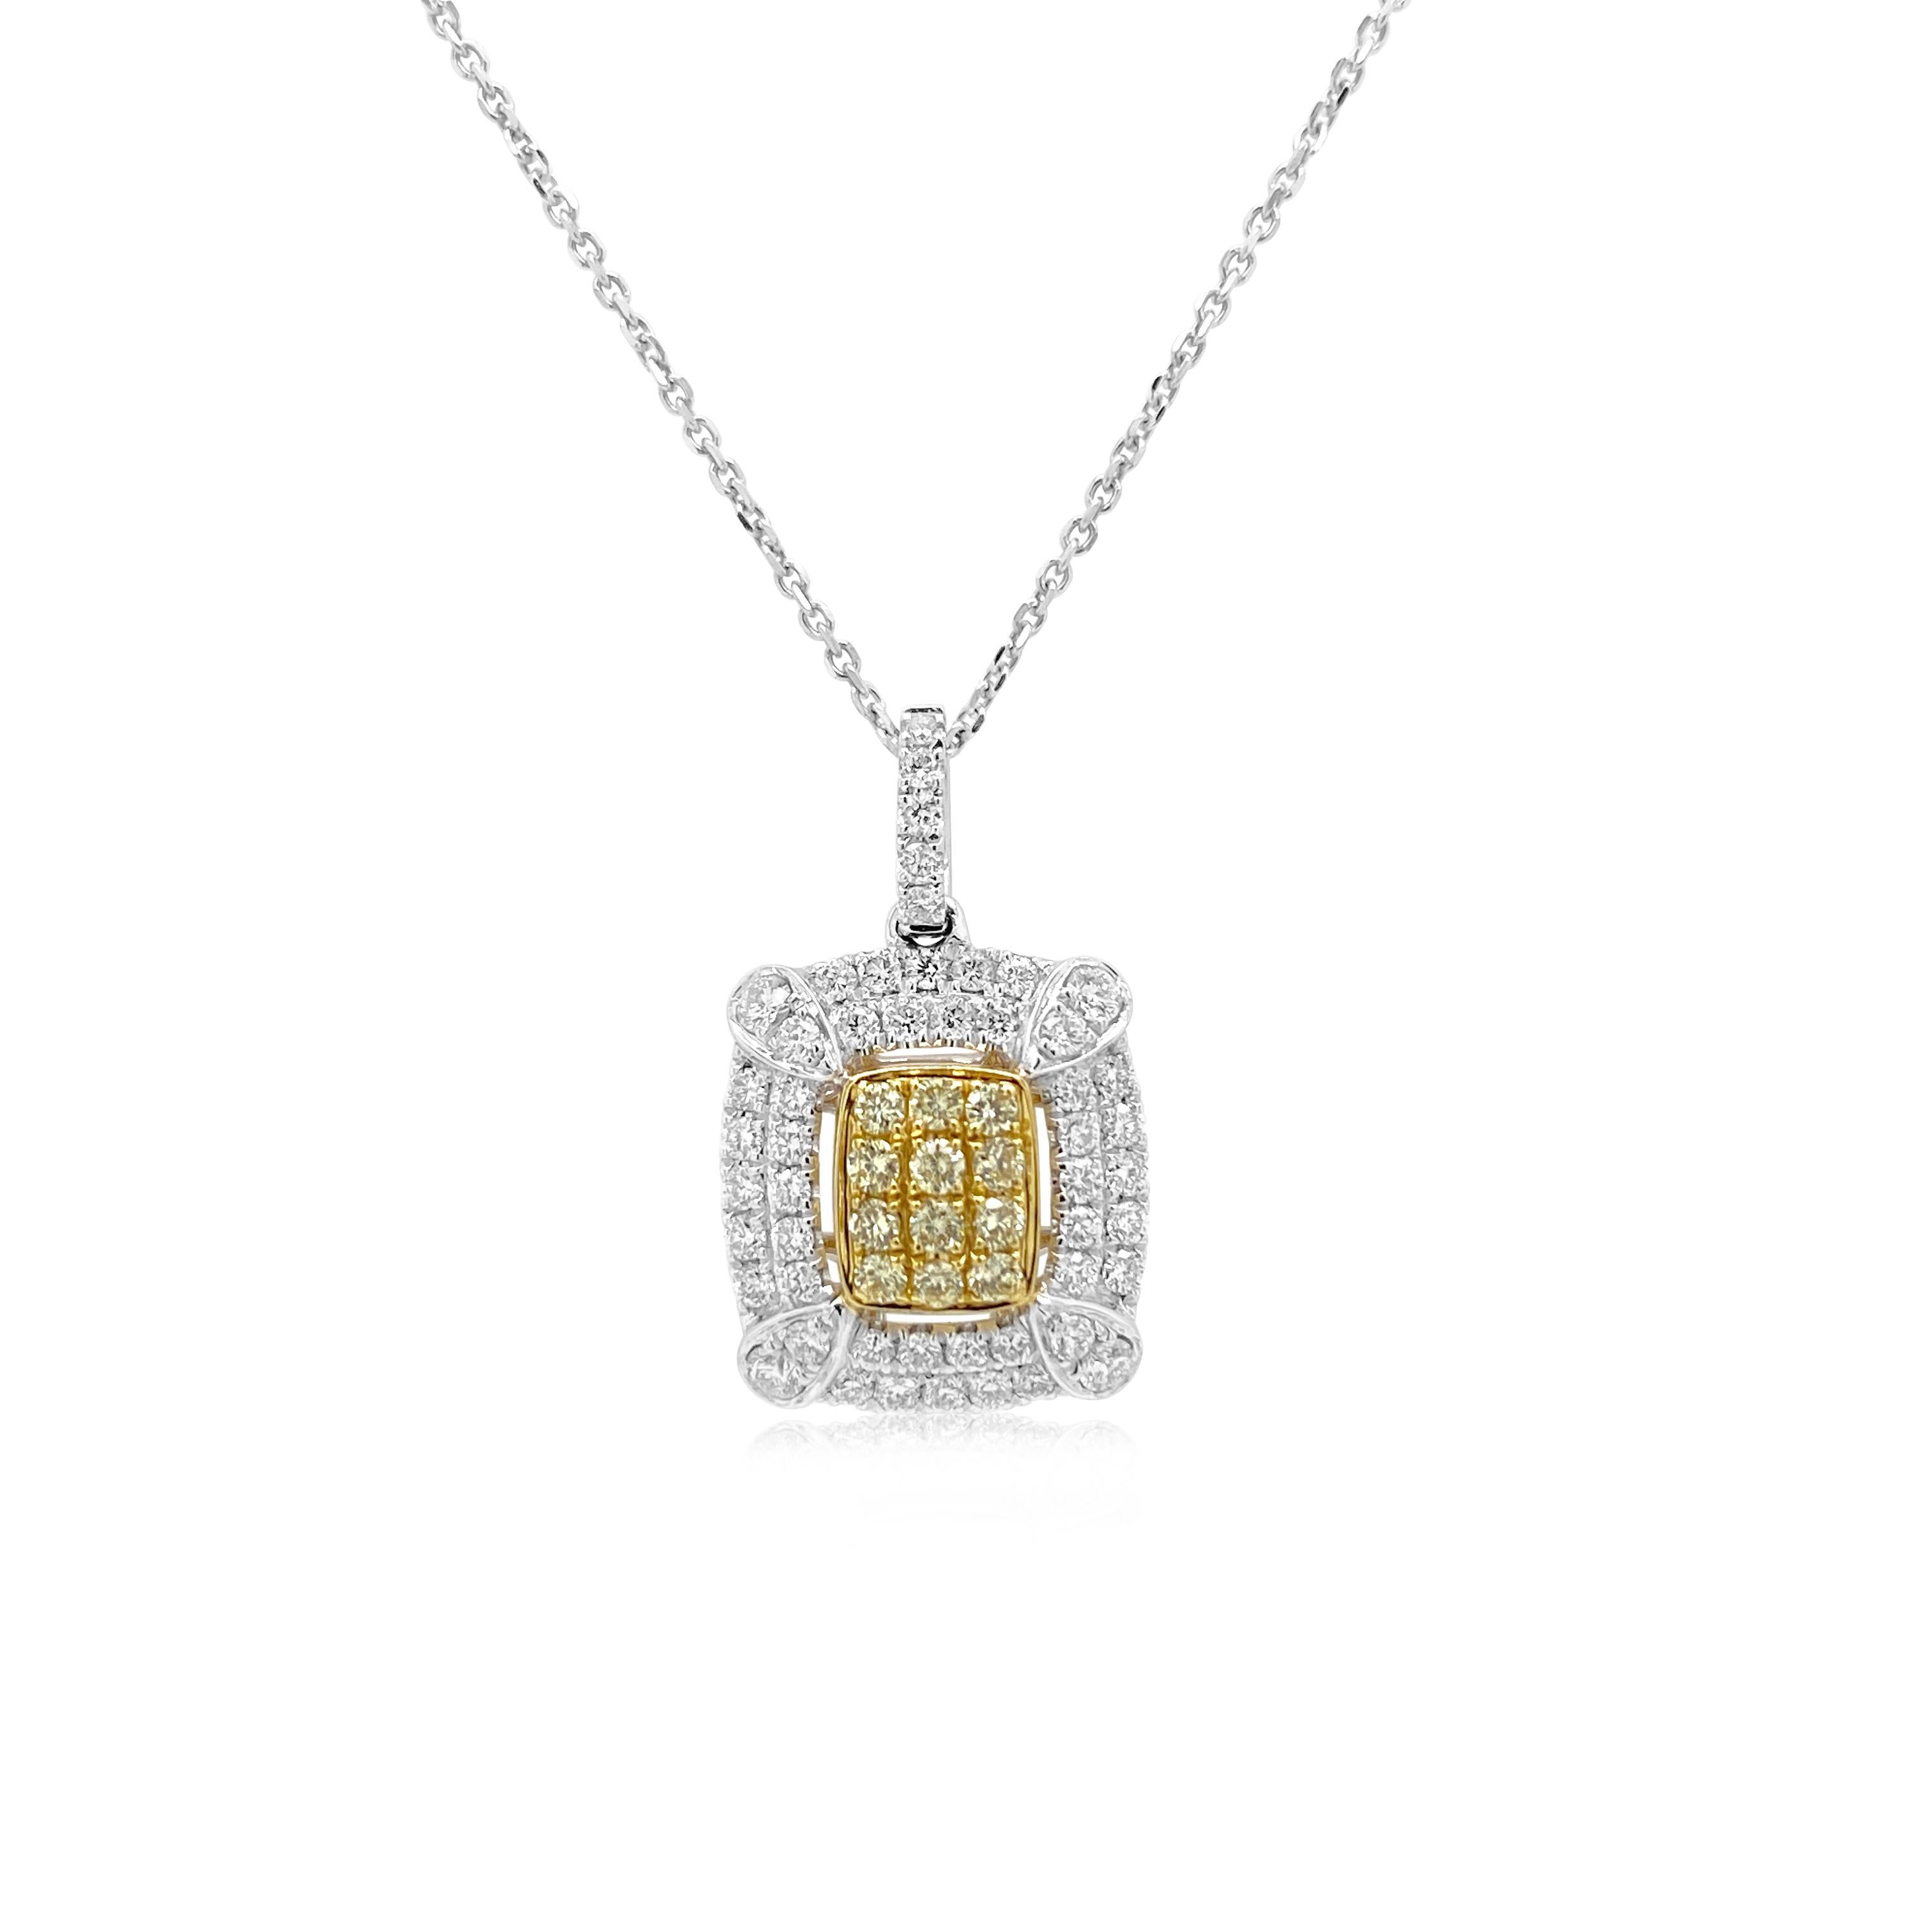 Designed with handpicked rare natural Yellow and white diamonds this pendant necklace looks elegant and modern with a sleek look. A perfect piece for a ‘haute monde’ gathering.
-	Round Brilliant Cut Yellow Diamonds total 0.13 carat
-	Round Brilliant